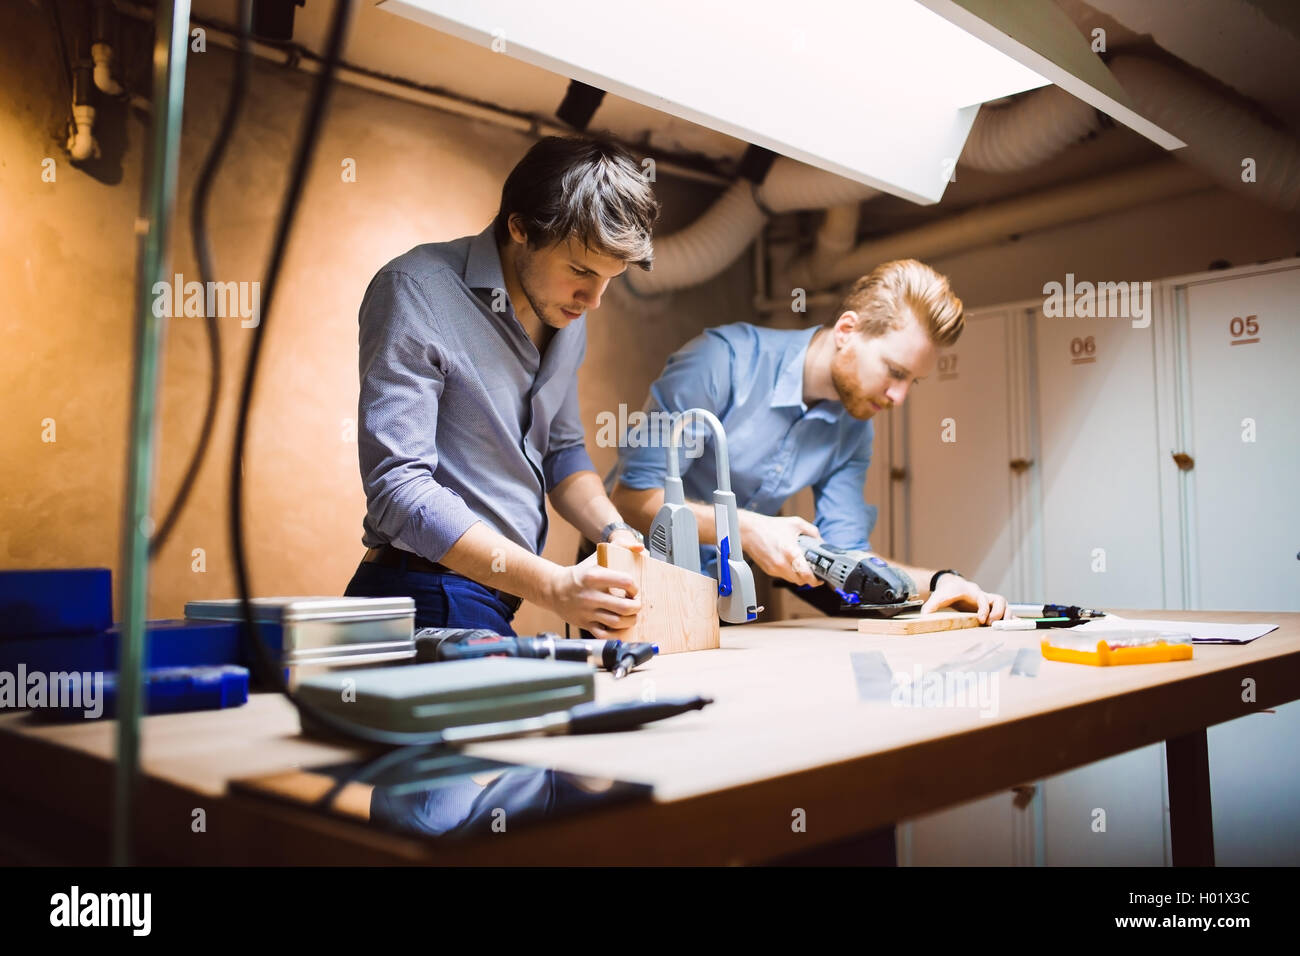 Two designers working together in workshop with precision tools Stock Photo